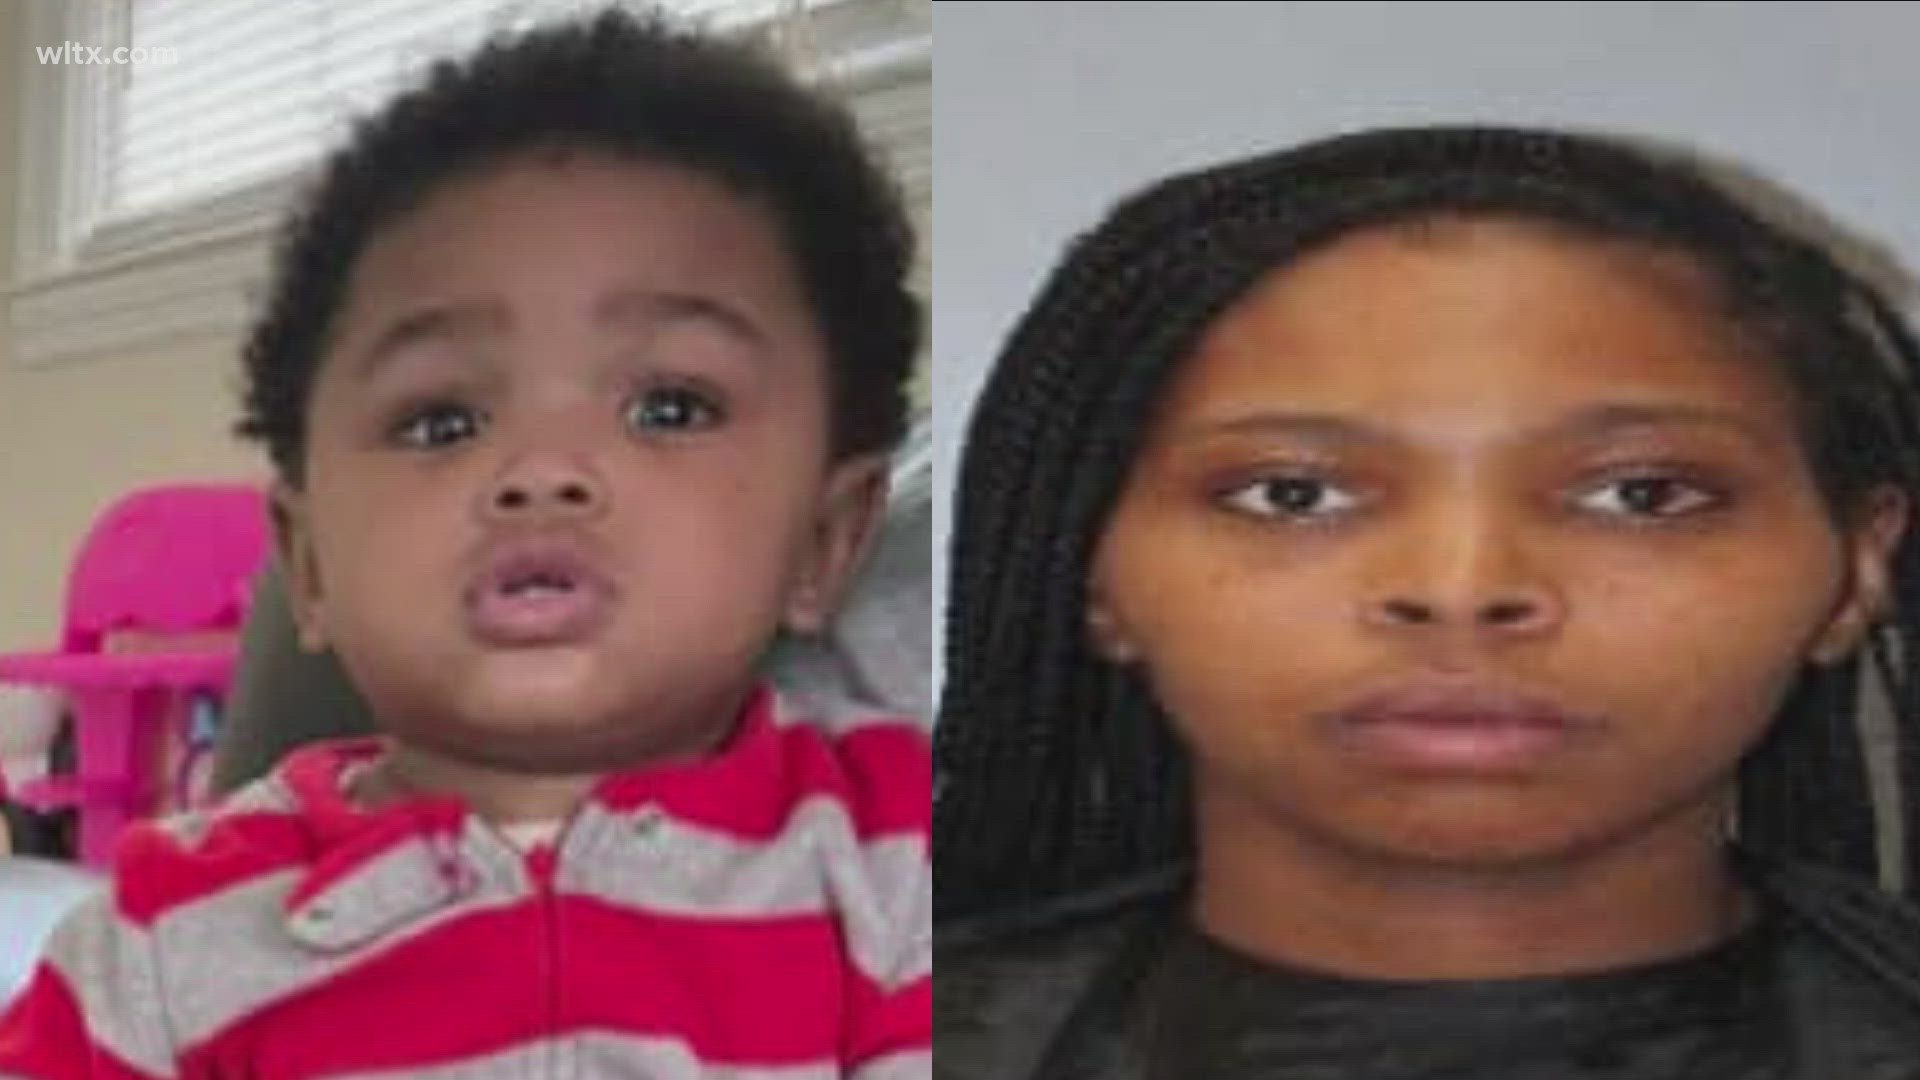 A Columbia baby reported missing and believed to be in danger on Friday has been found, according to the Richland County Sheriff's Department.